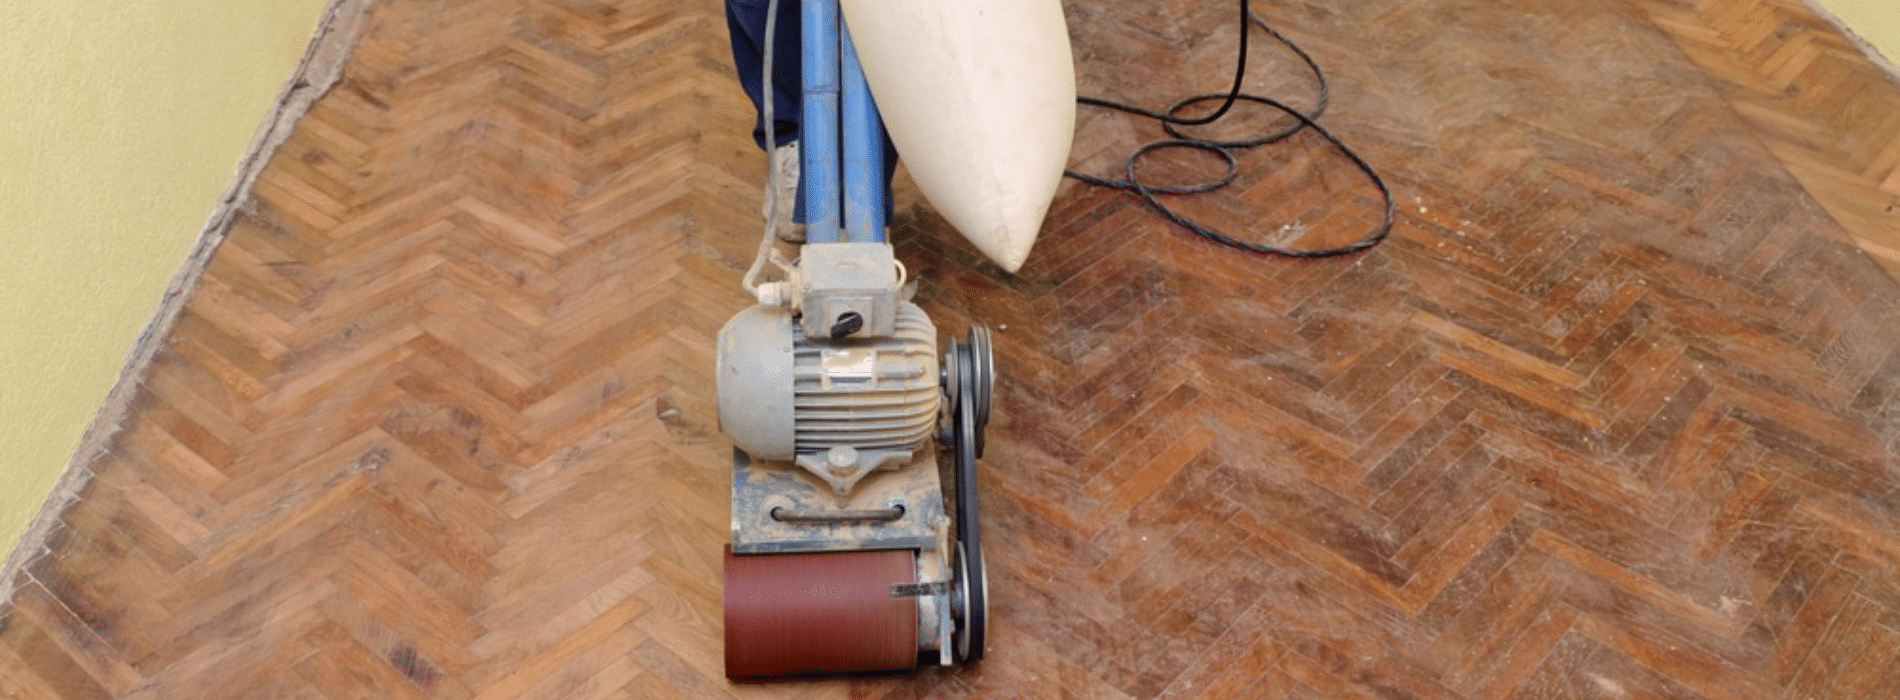 Mr Sander® in Fitzrovia, W1, employing the powerful Bona Belt Effect sander (2.2 kW) for sanding herringbone floors. Operating at 230V and 50Hz/60Hz, this 250x750 mm sander, equipped with a dust extraction system and HEPA filter, guarantees a pristine and efficient outcome.